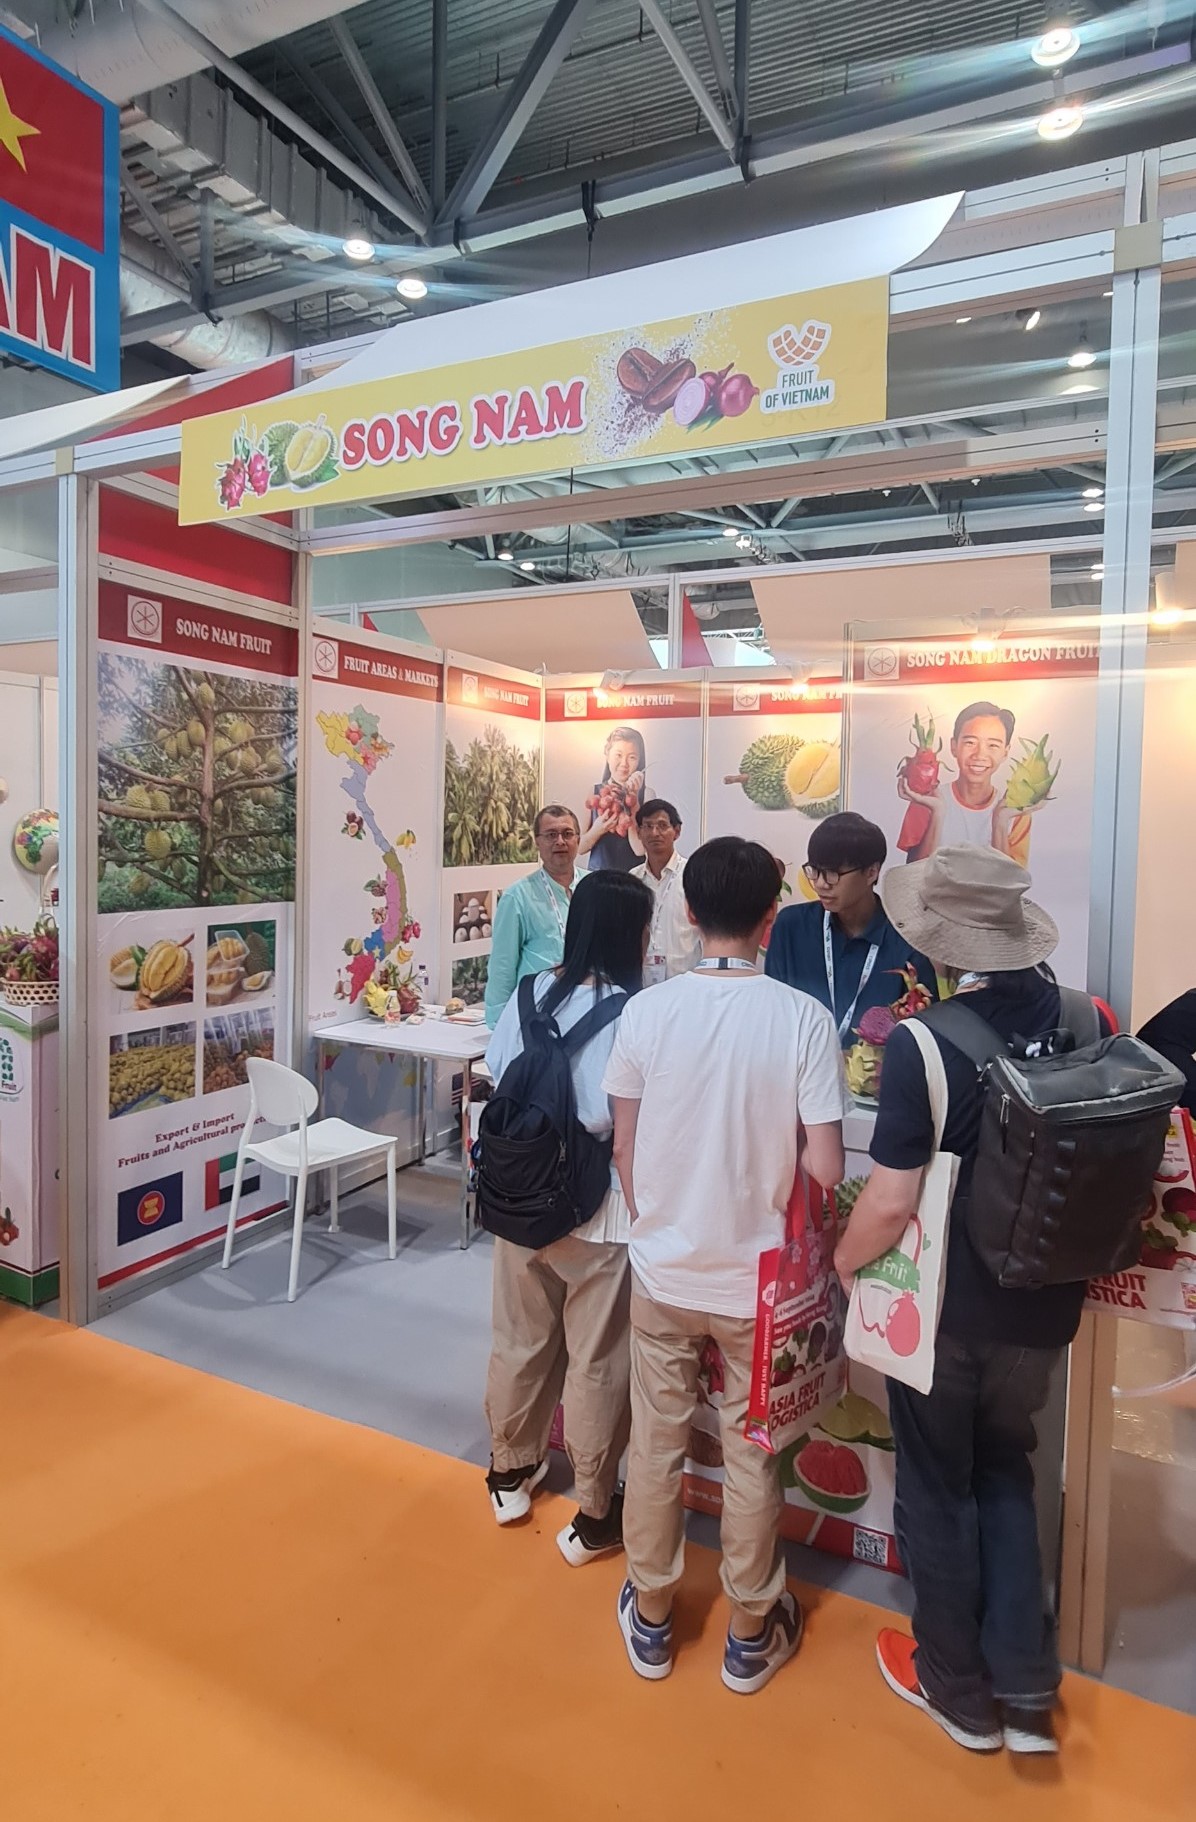 Song Nam has attracted a big interest from customers